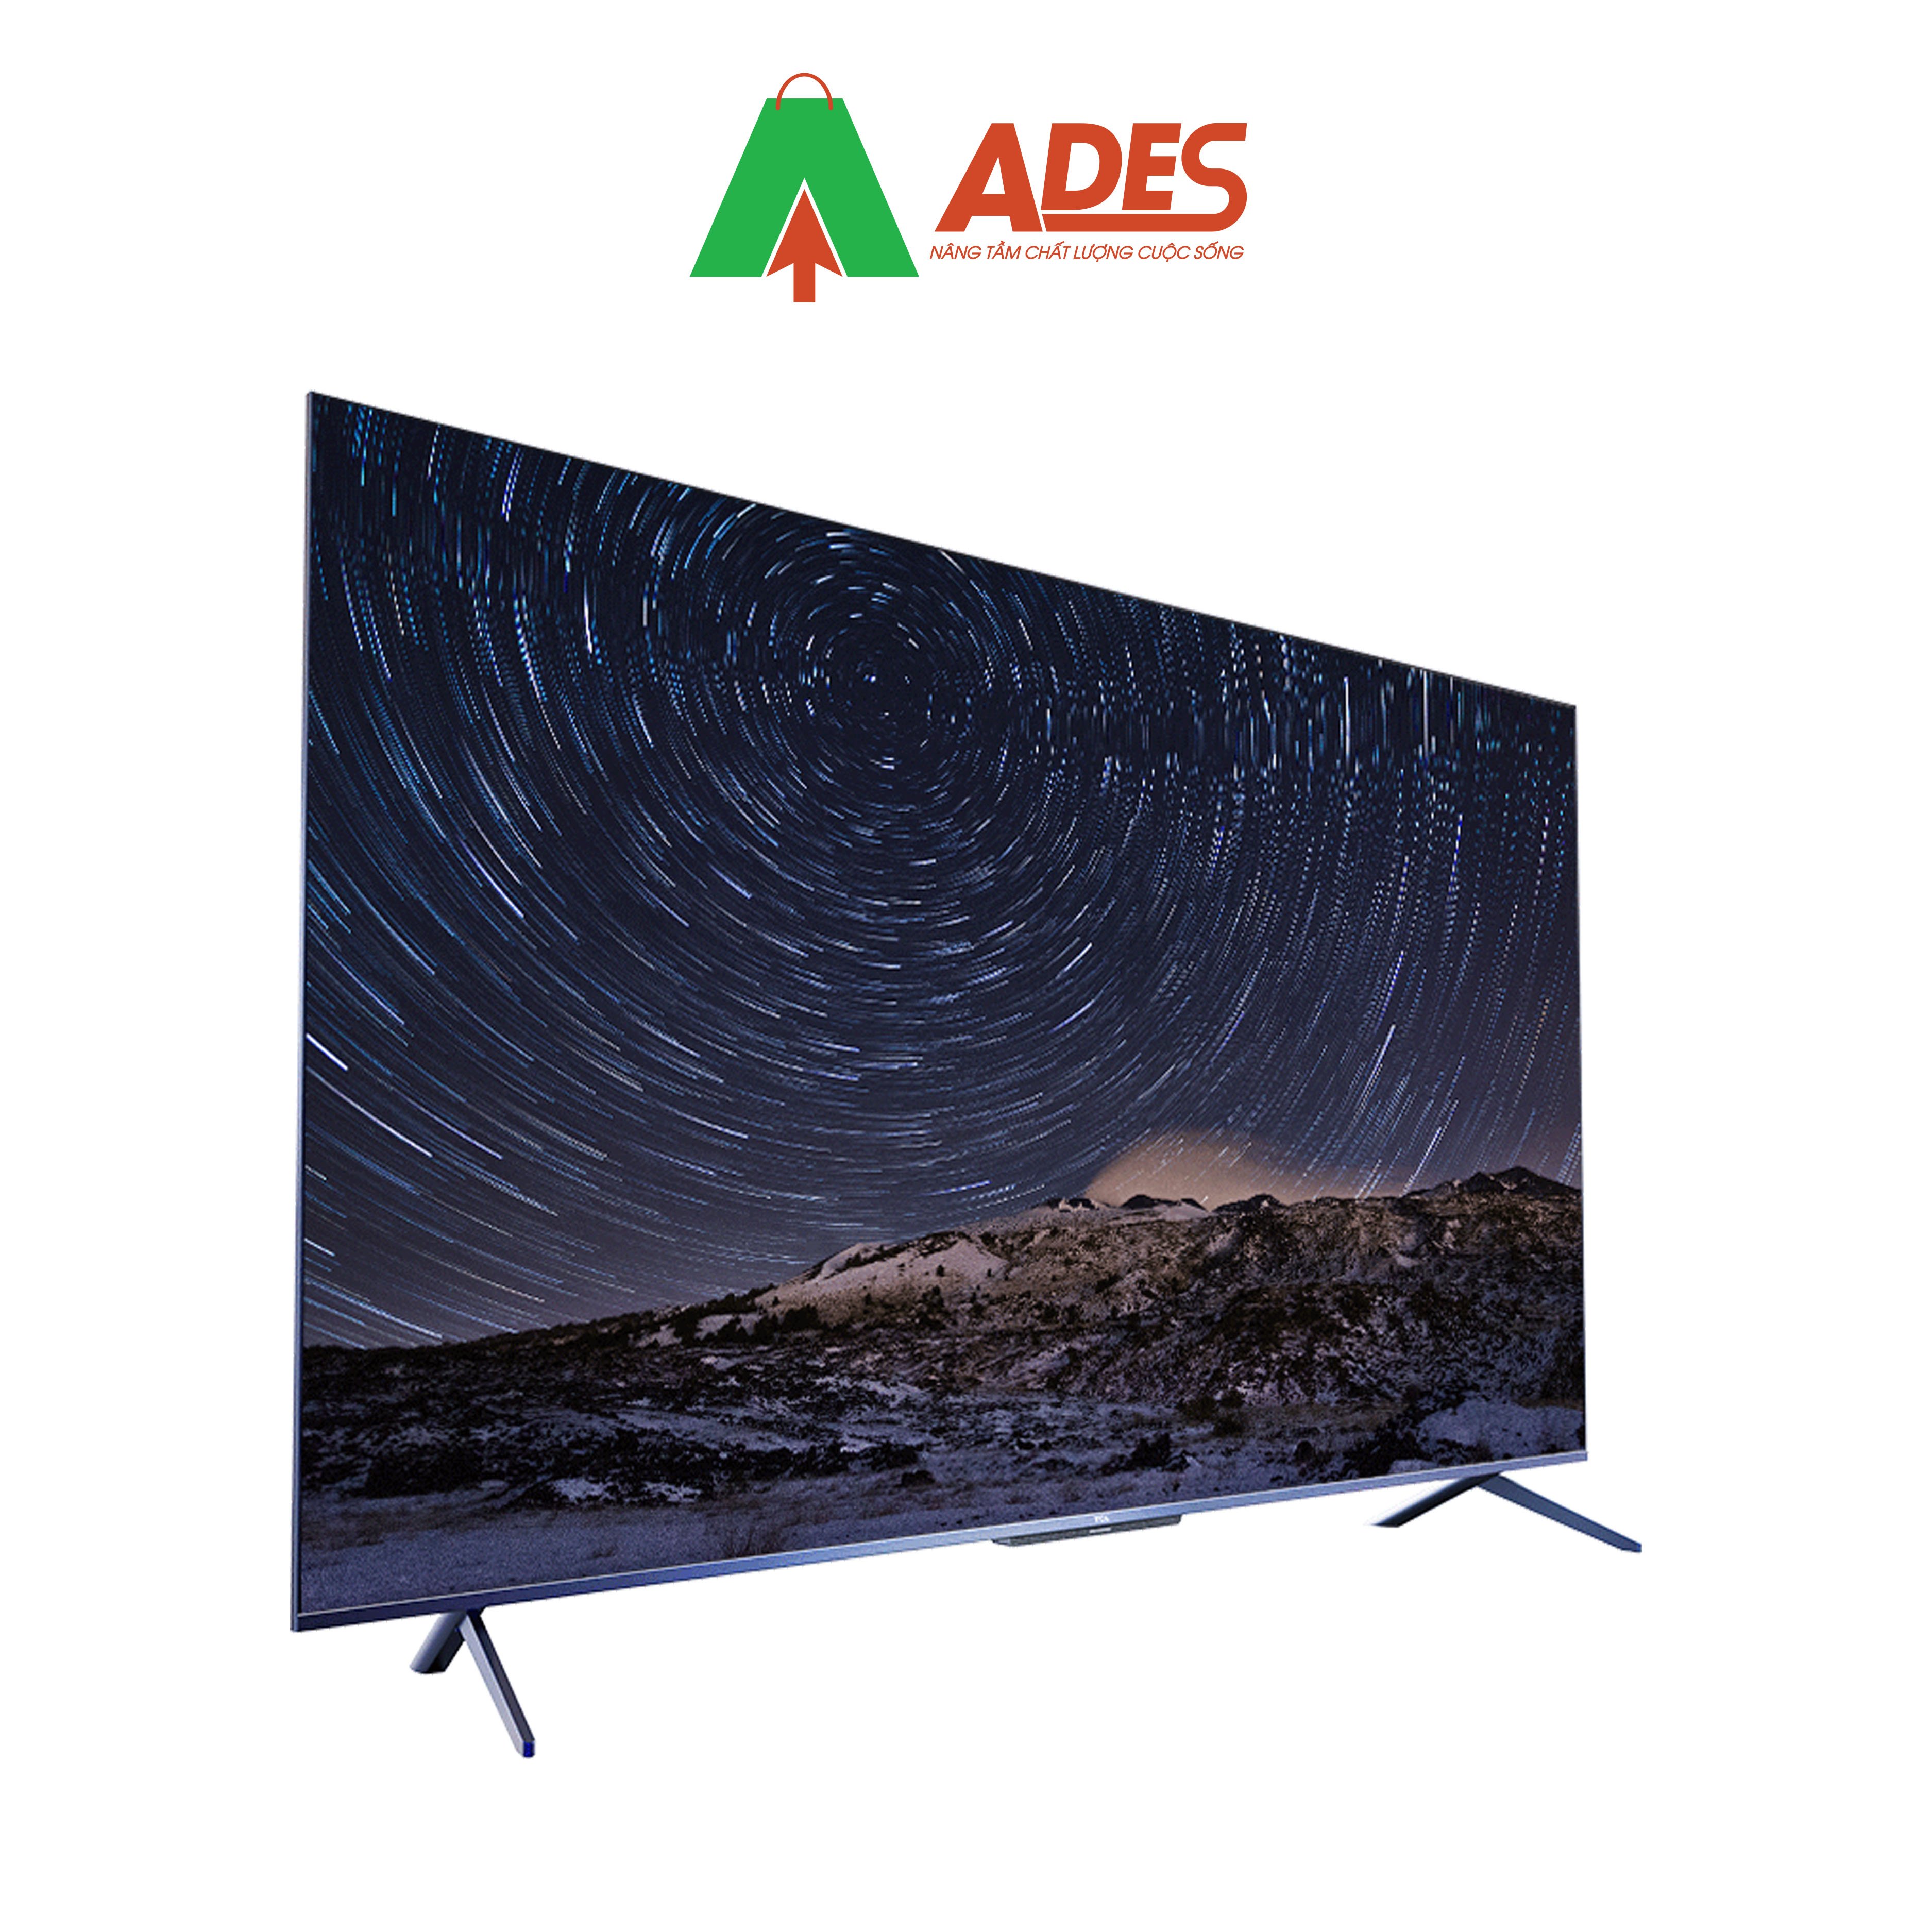 Hinh anh thuc te Android TV TCL QLED 4K 65 Inch 65C728